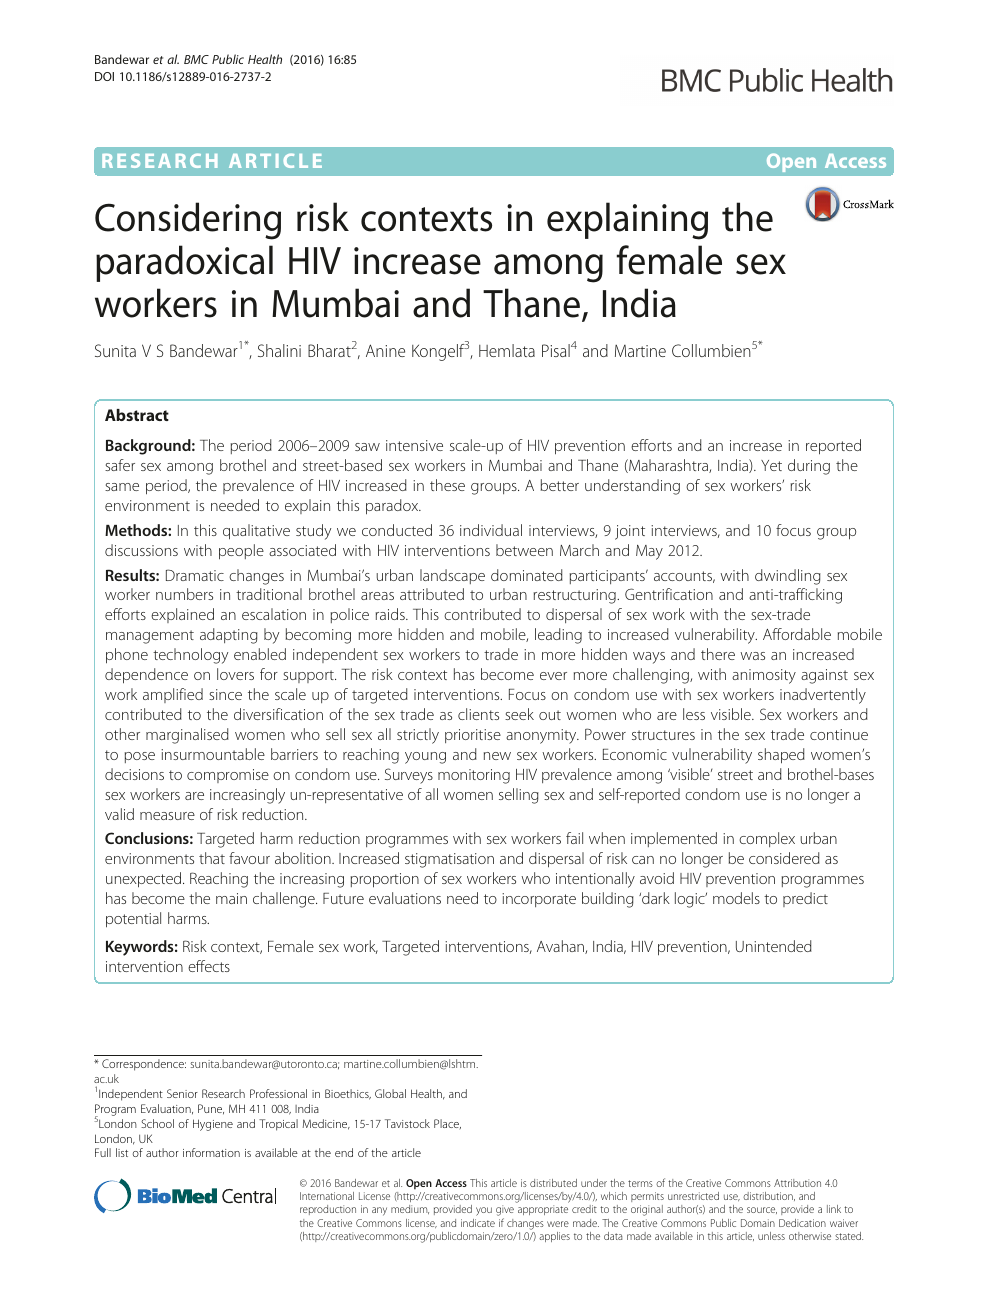 Considering risk contexts in explaining the paradoxical HIV increase among female sex workers in Mumbai and Thane, India